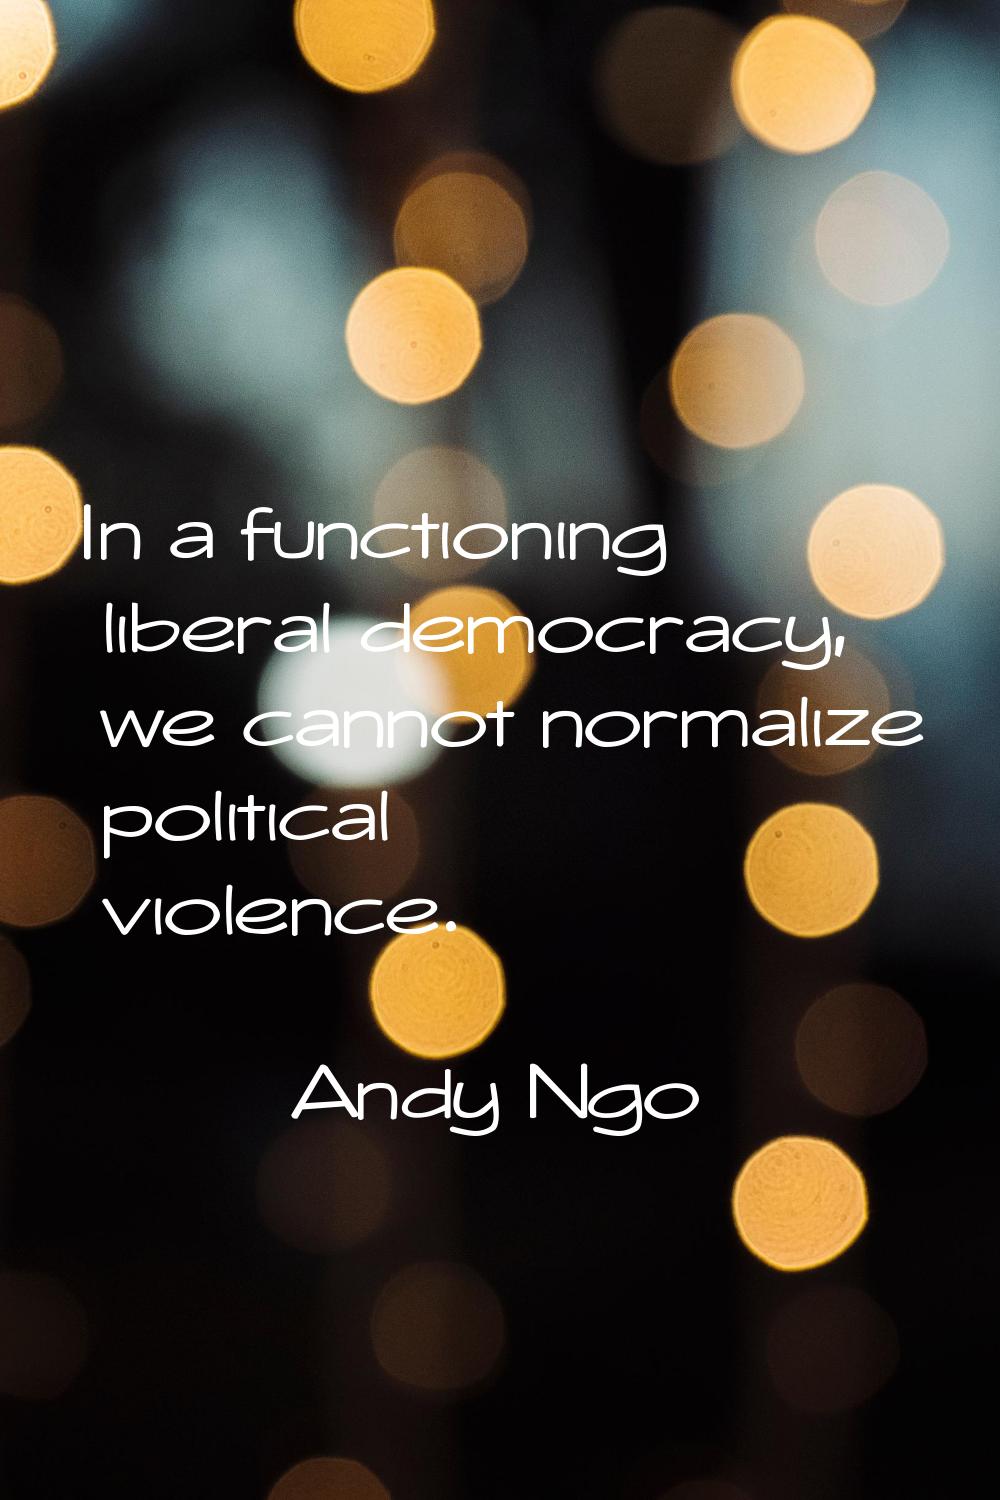 In a functioning liberal democracy, we cannot normalize political violence.